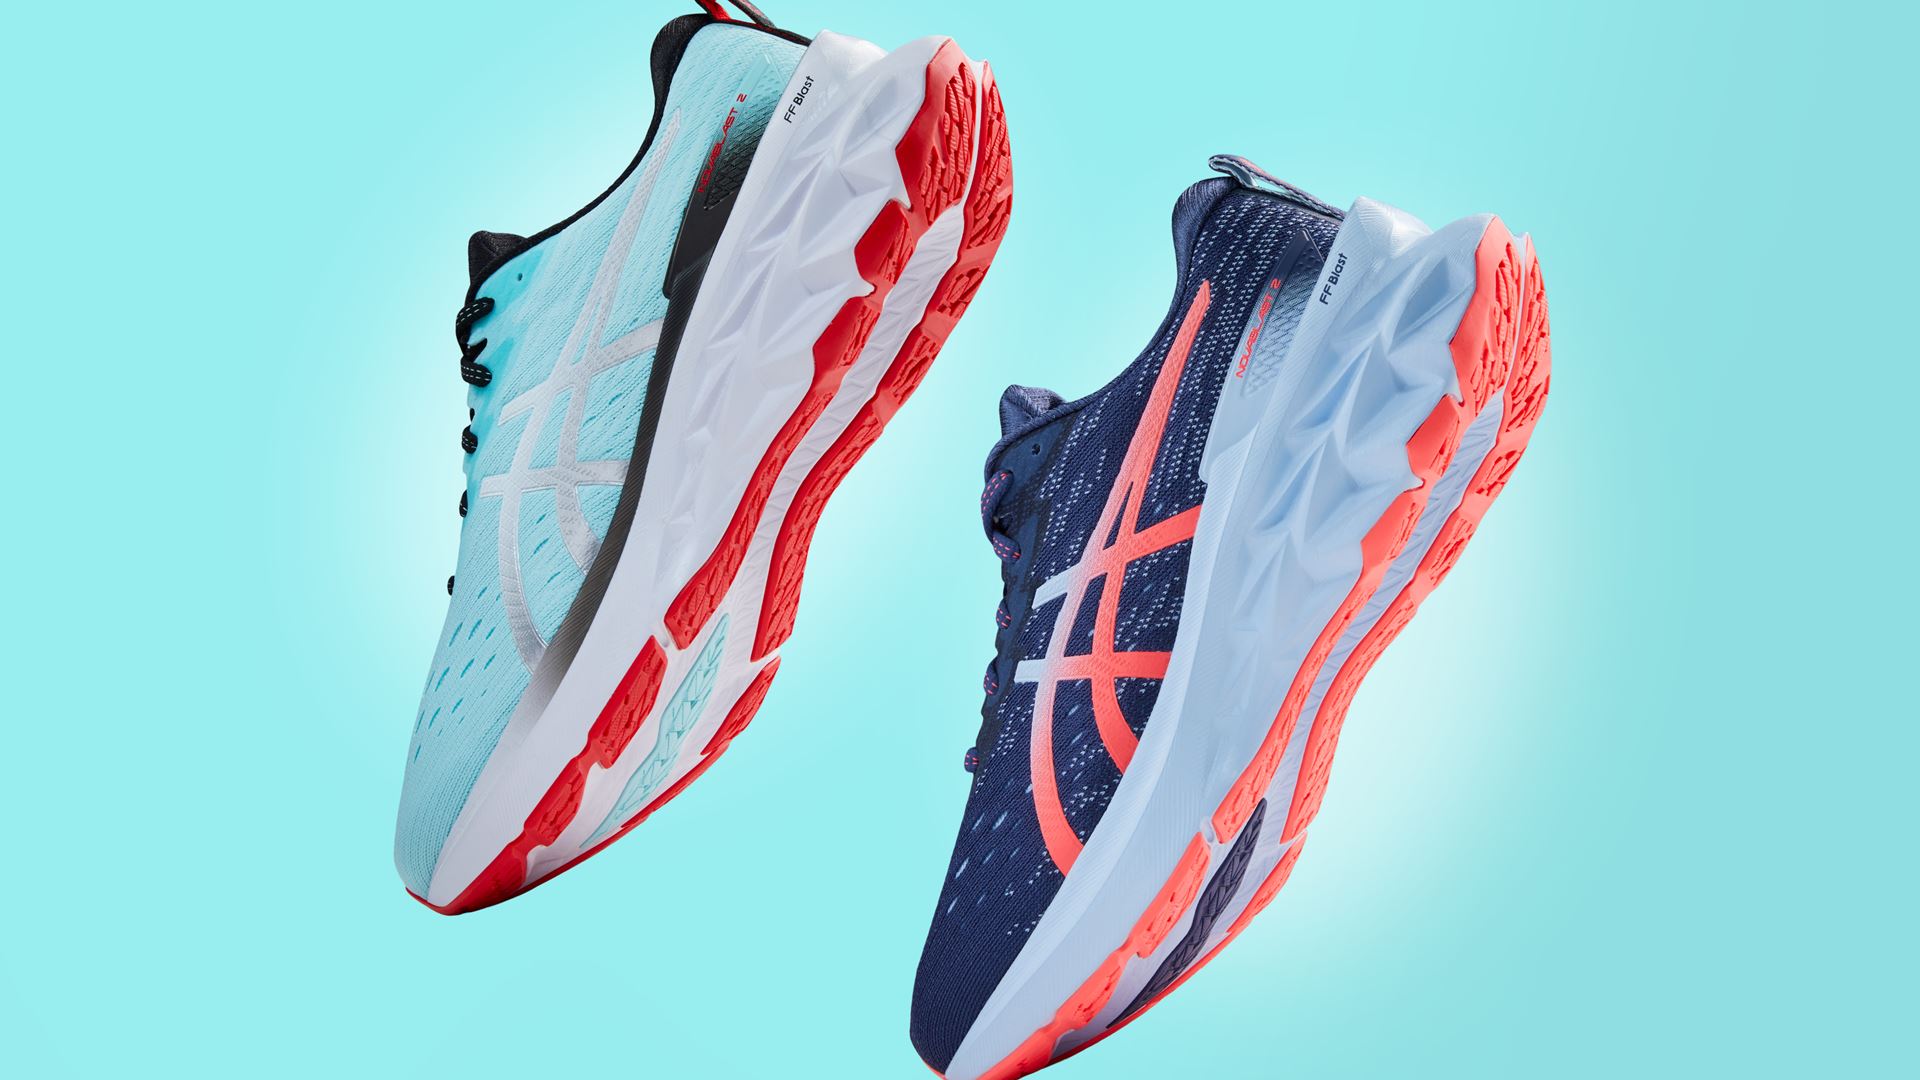 ASICS today launches the new BLAST BEYOND™ 2, putting an extra spring in runners’ steps with excellent energy return